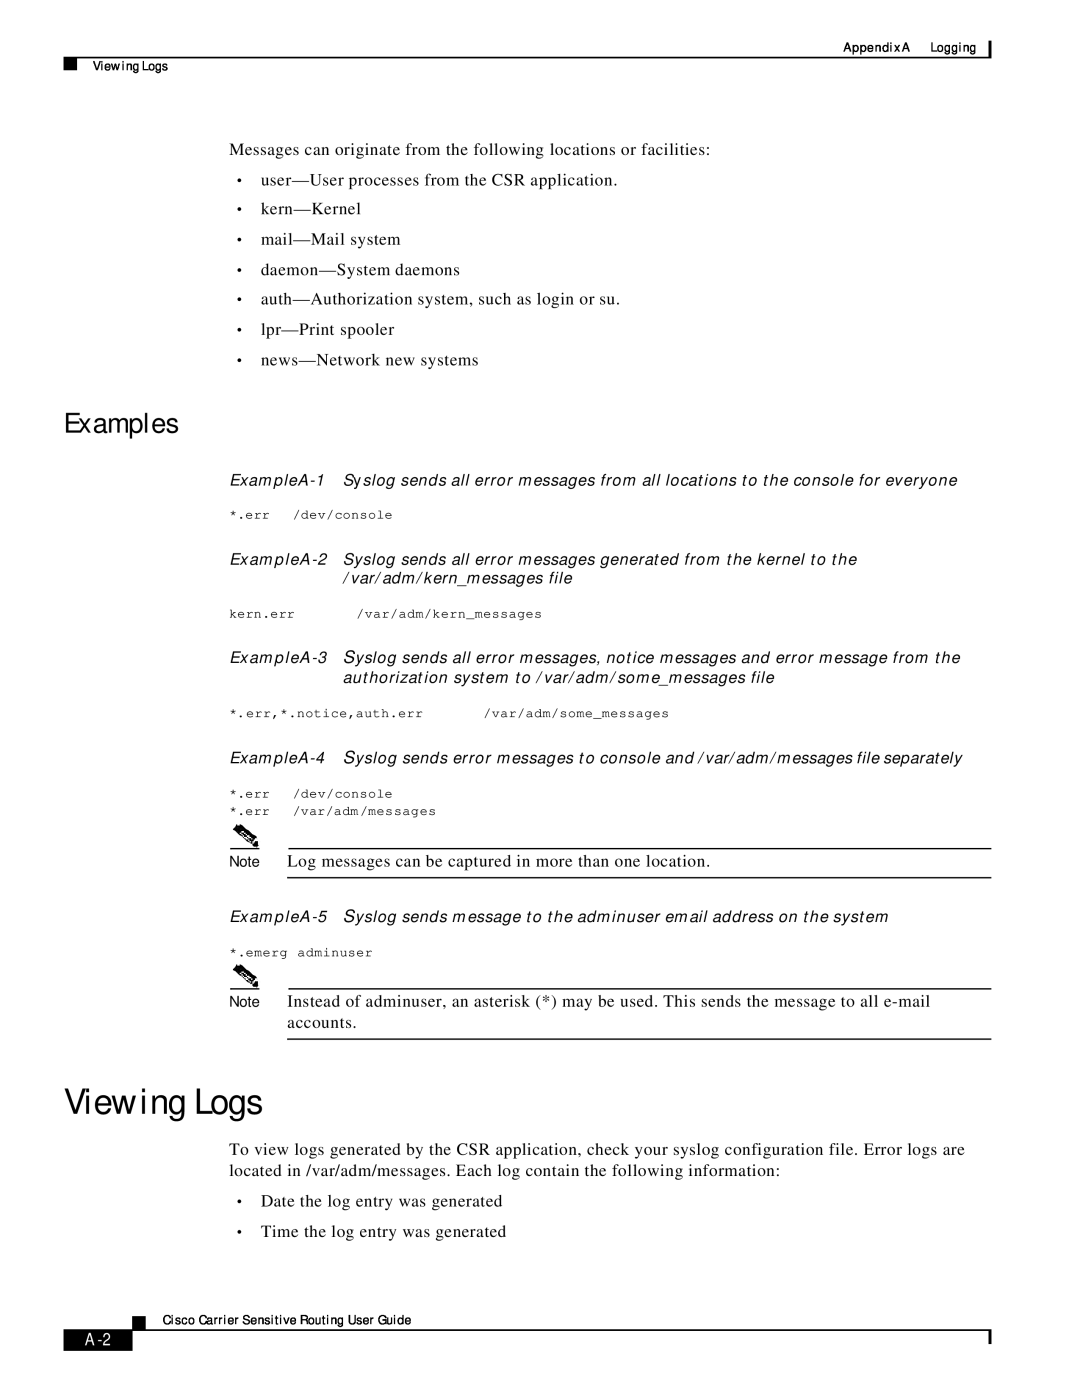 Cisco Systems Version 1.1 manual Viewing Logs, Examples 